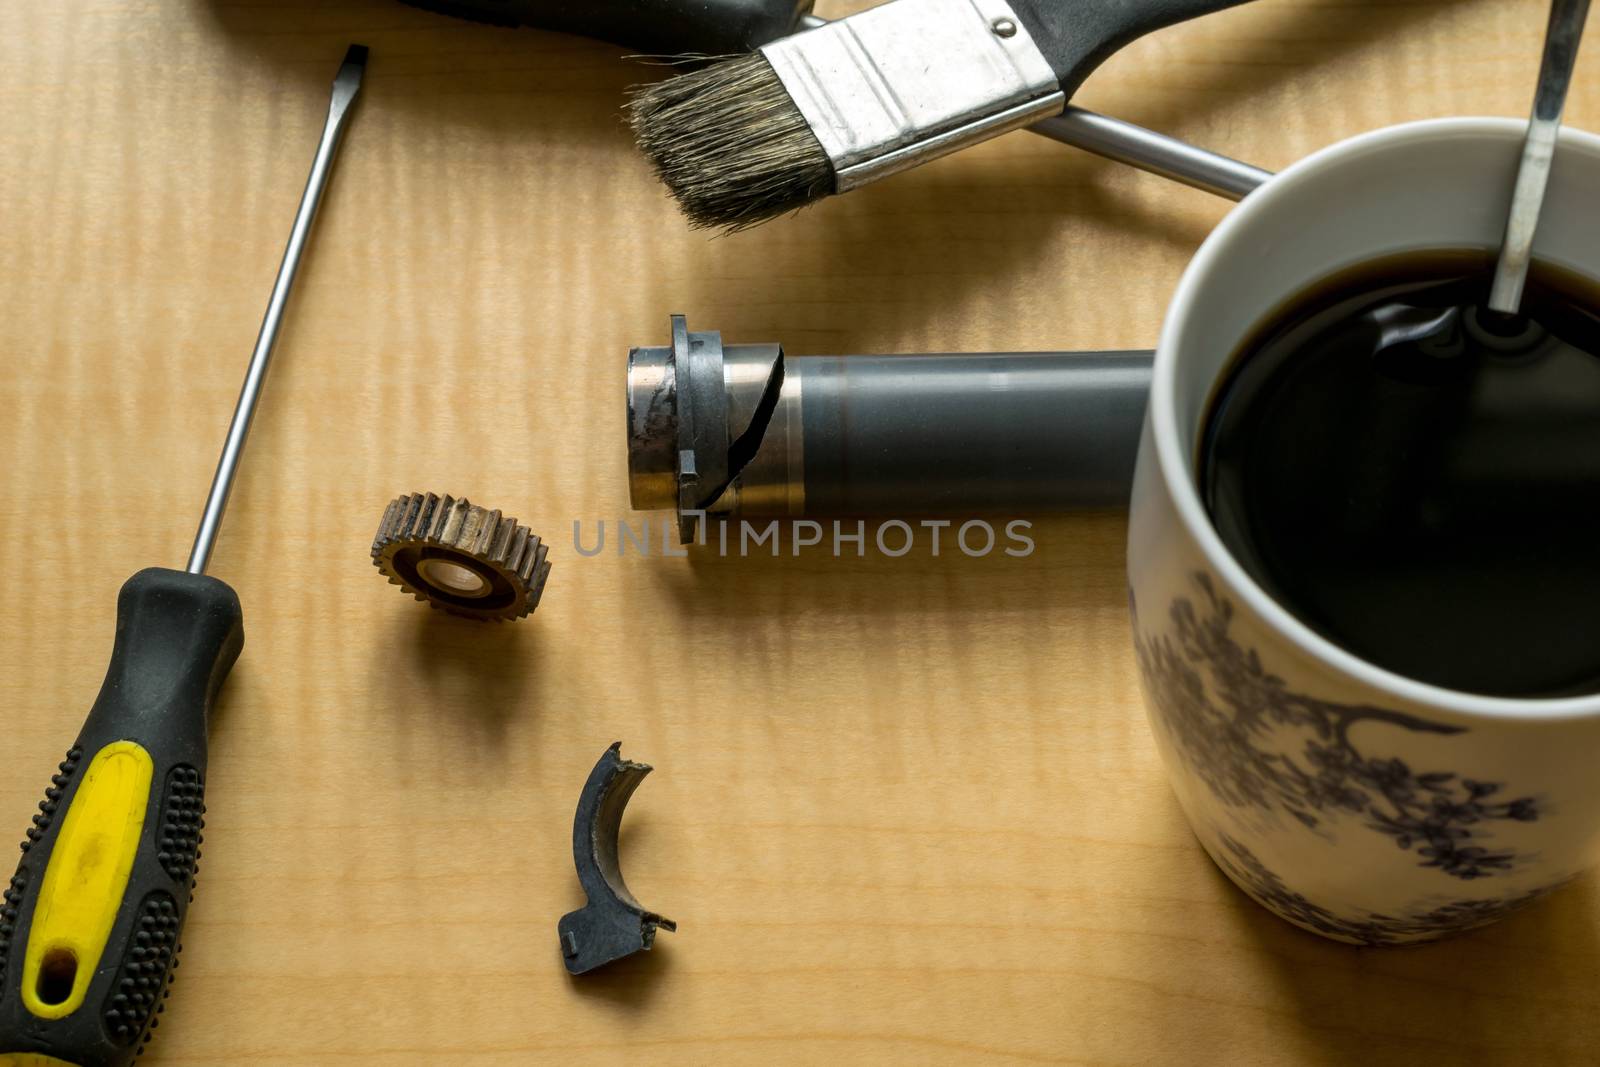 printer parts, tools, grease, broken gear and coffee mug on the table by jk3030